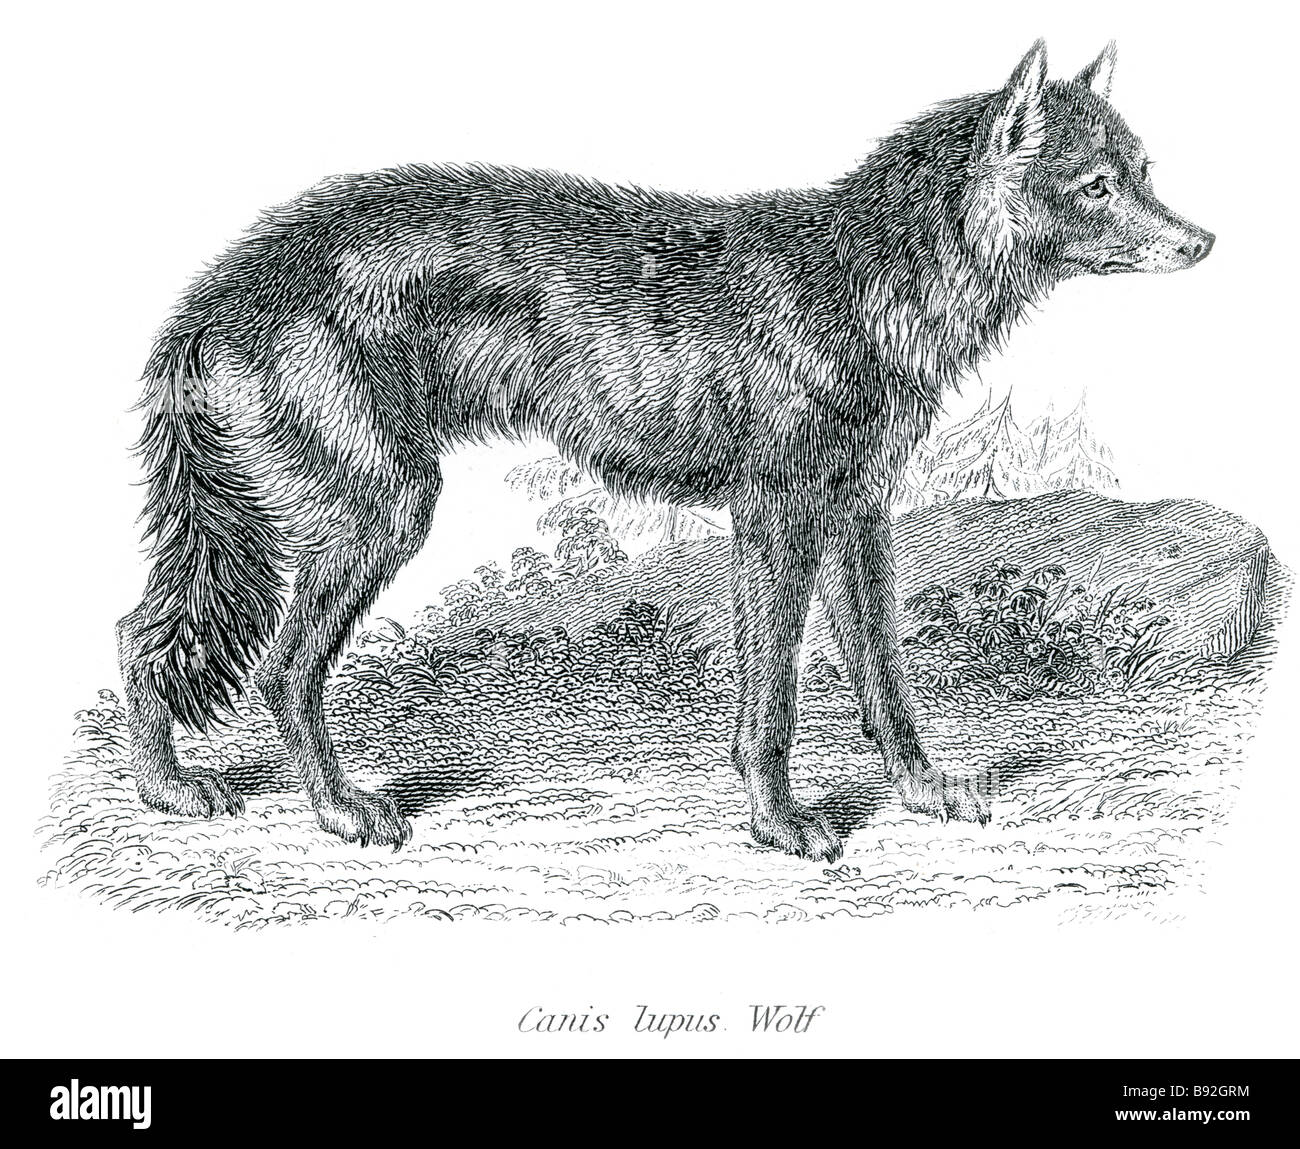 canis lupus wolf The Eurasian Wolf (Canis lupus lupus), also known as the Common Wolf, European Wolf, Carpathian Wolf, Steppes W Stock Photo